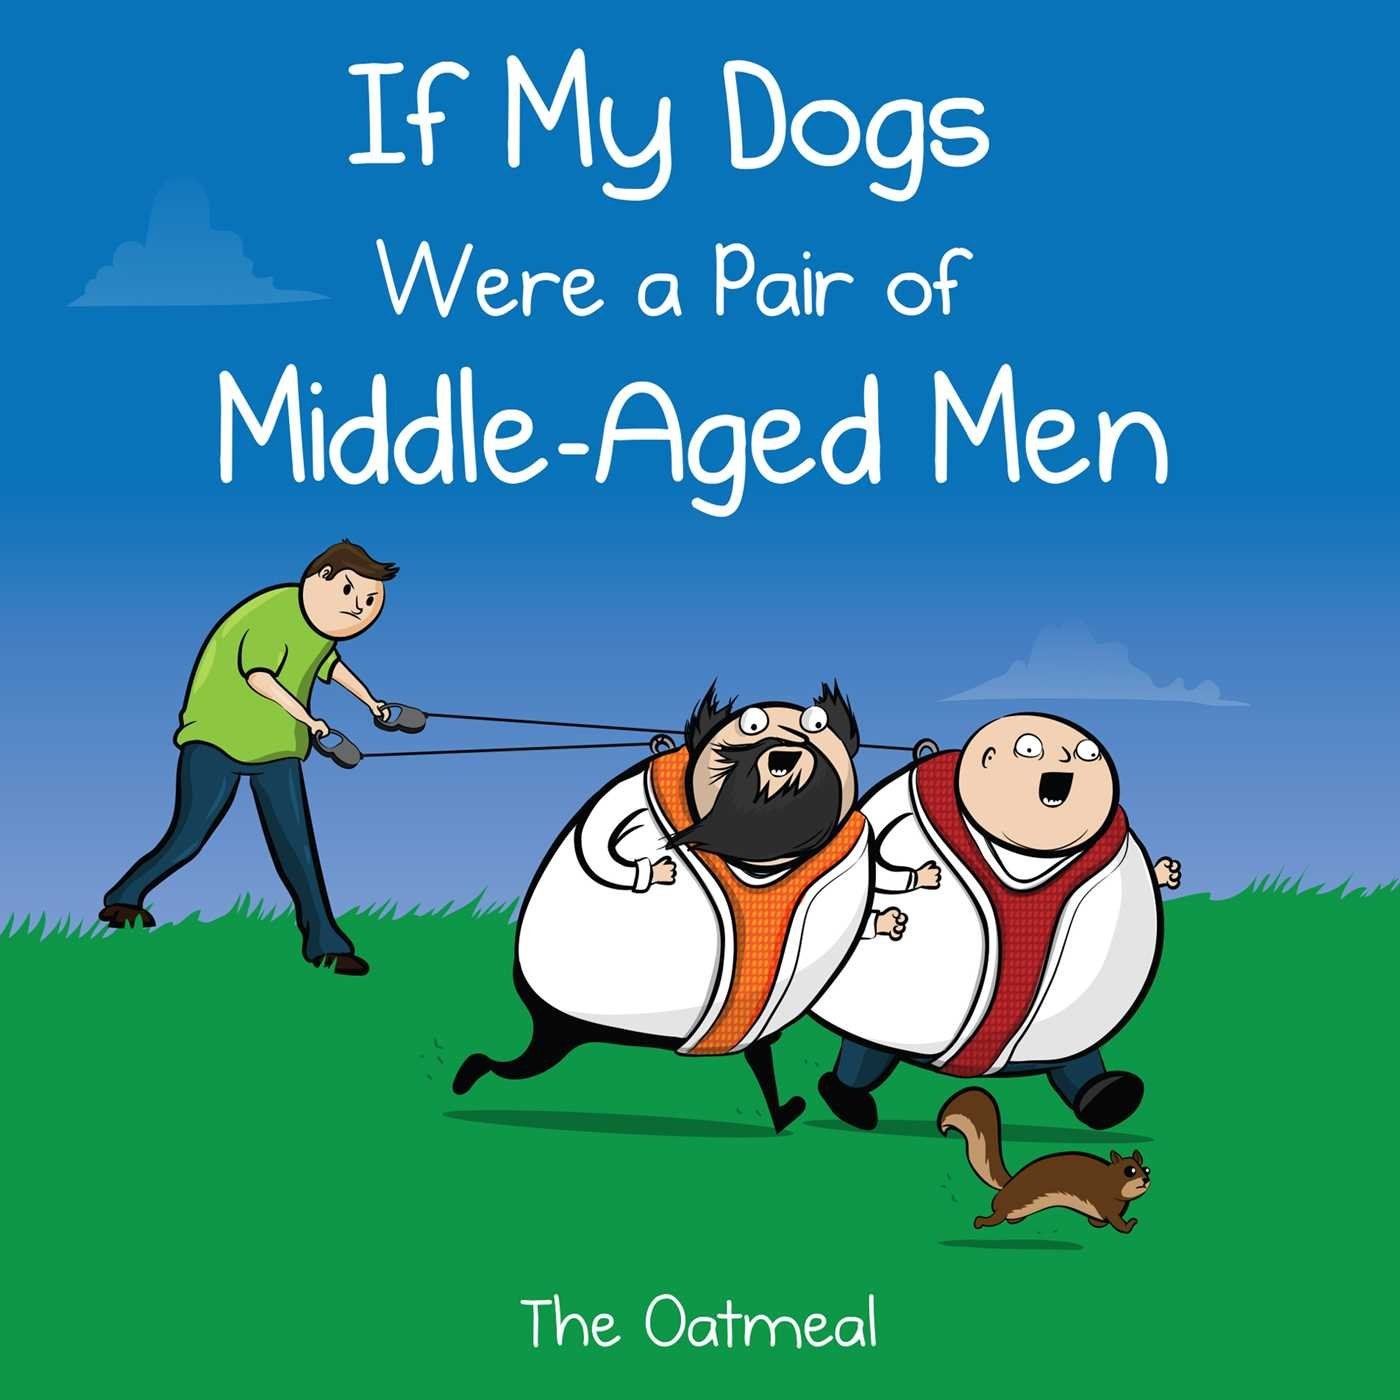 Inman's charmingly absurd and pitch-perfect gift book imagines what life would be like if his dogs were a couple of old men.